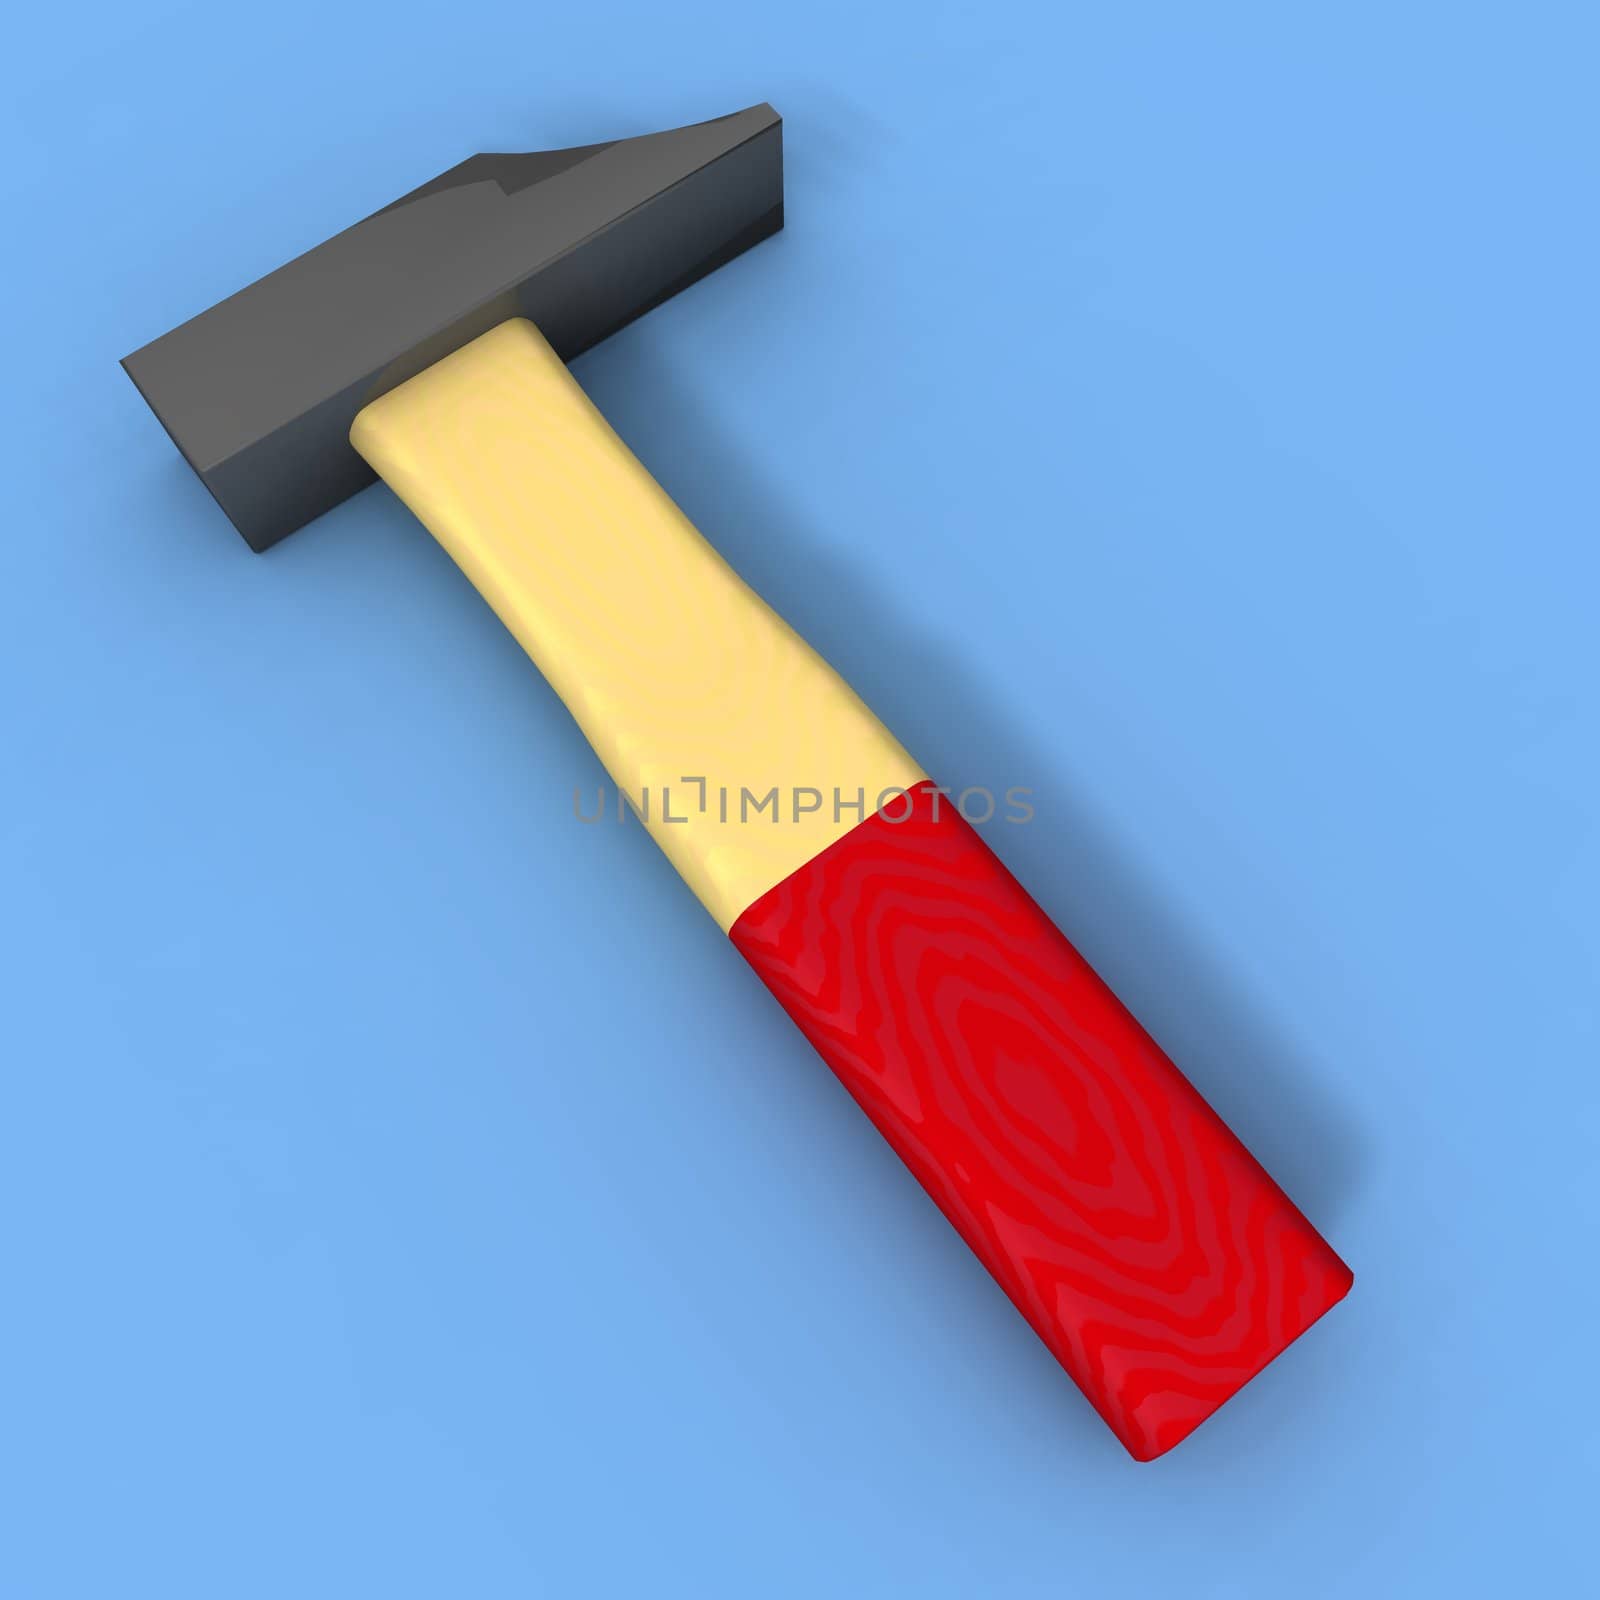 a 3D rendering of a hammer on a blue background